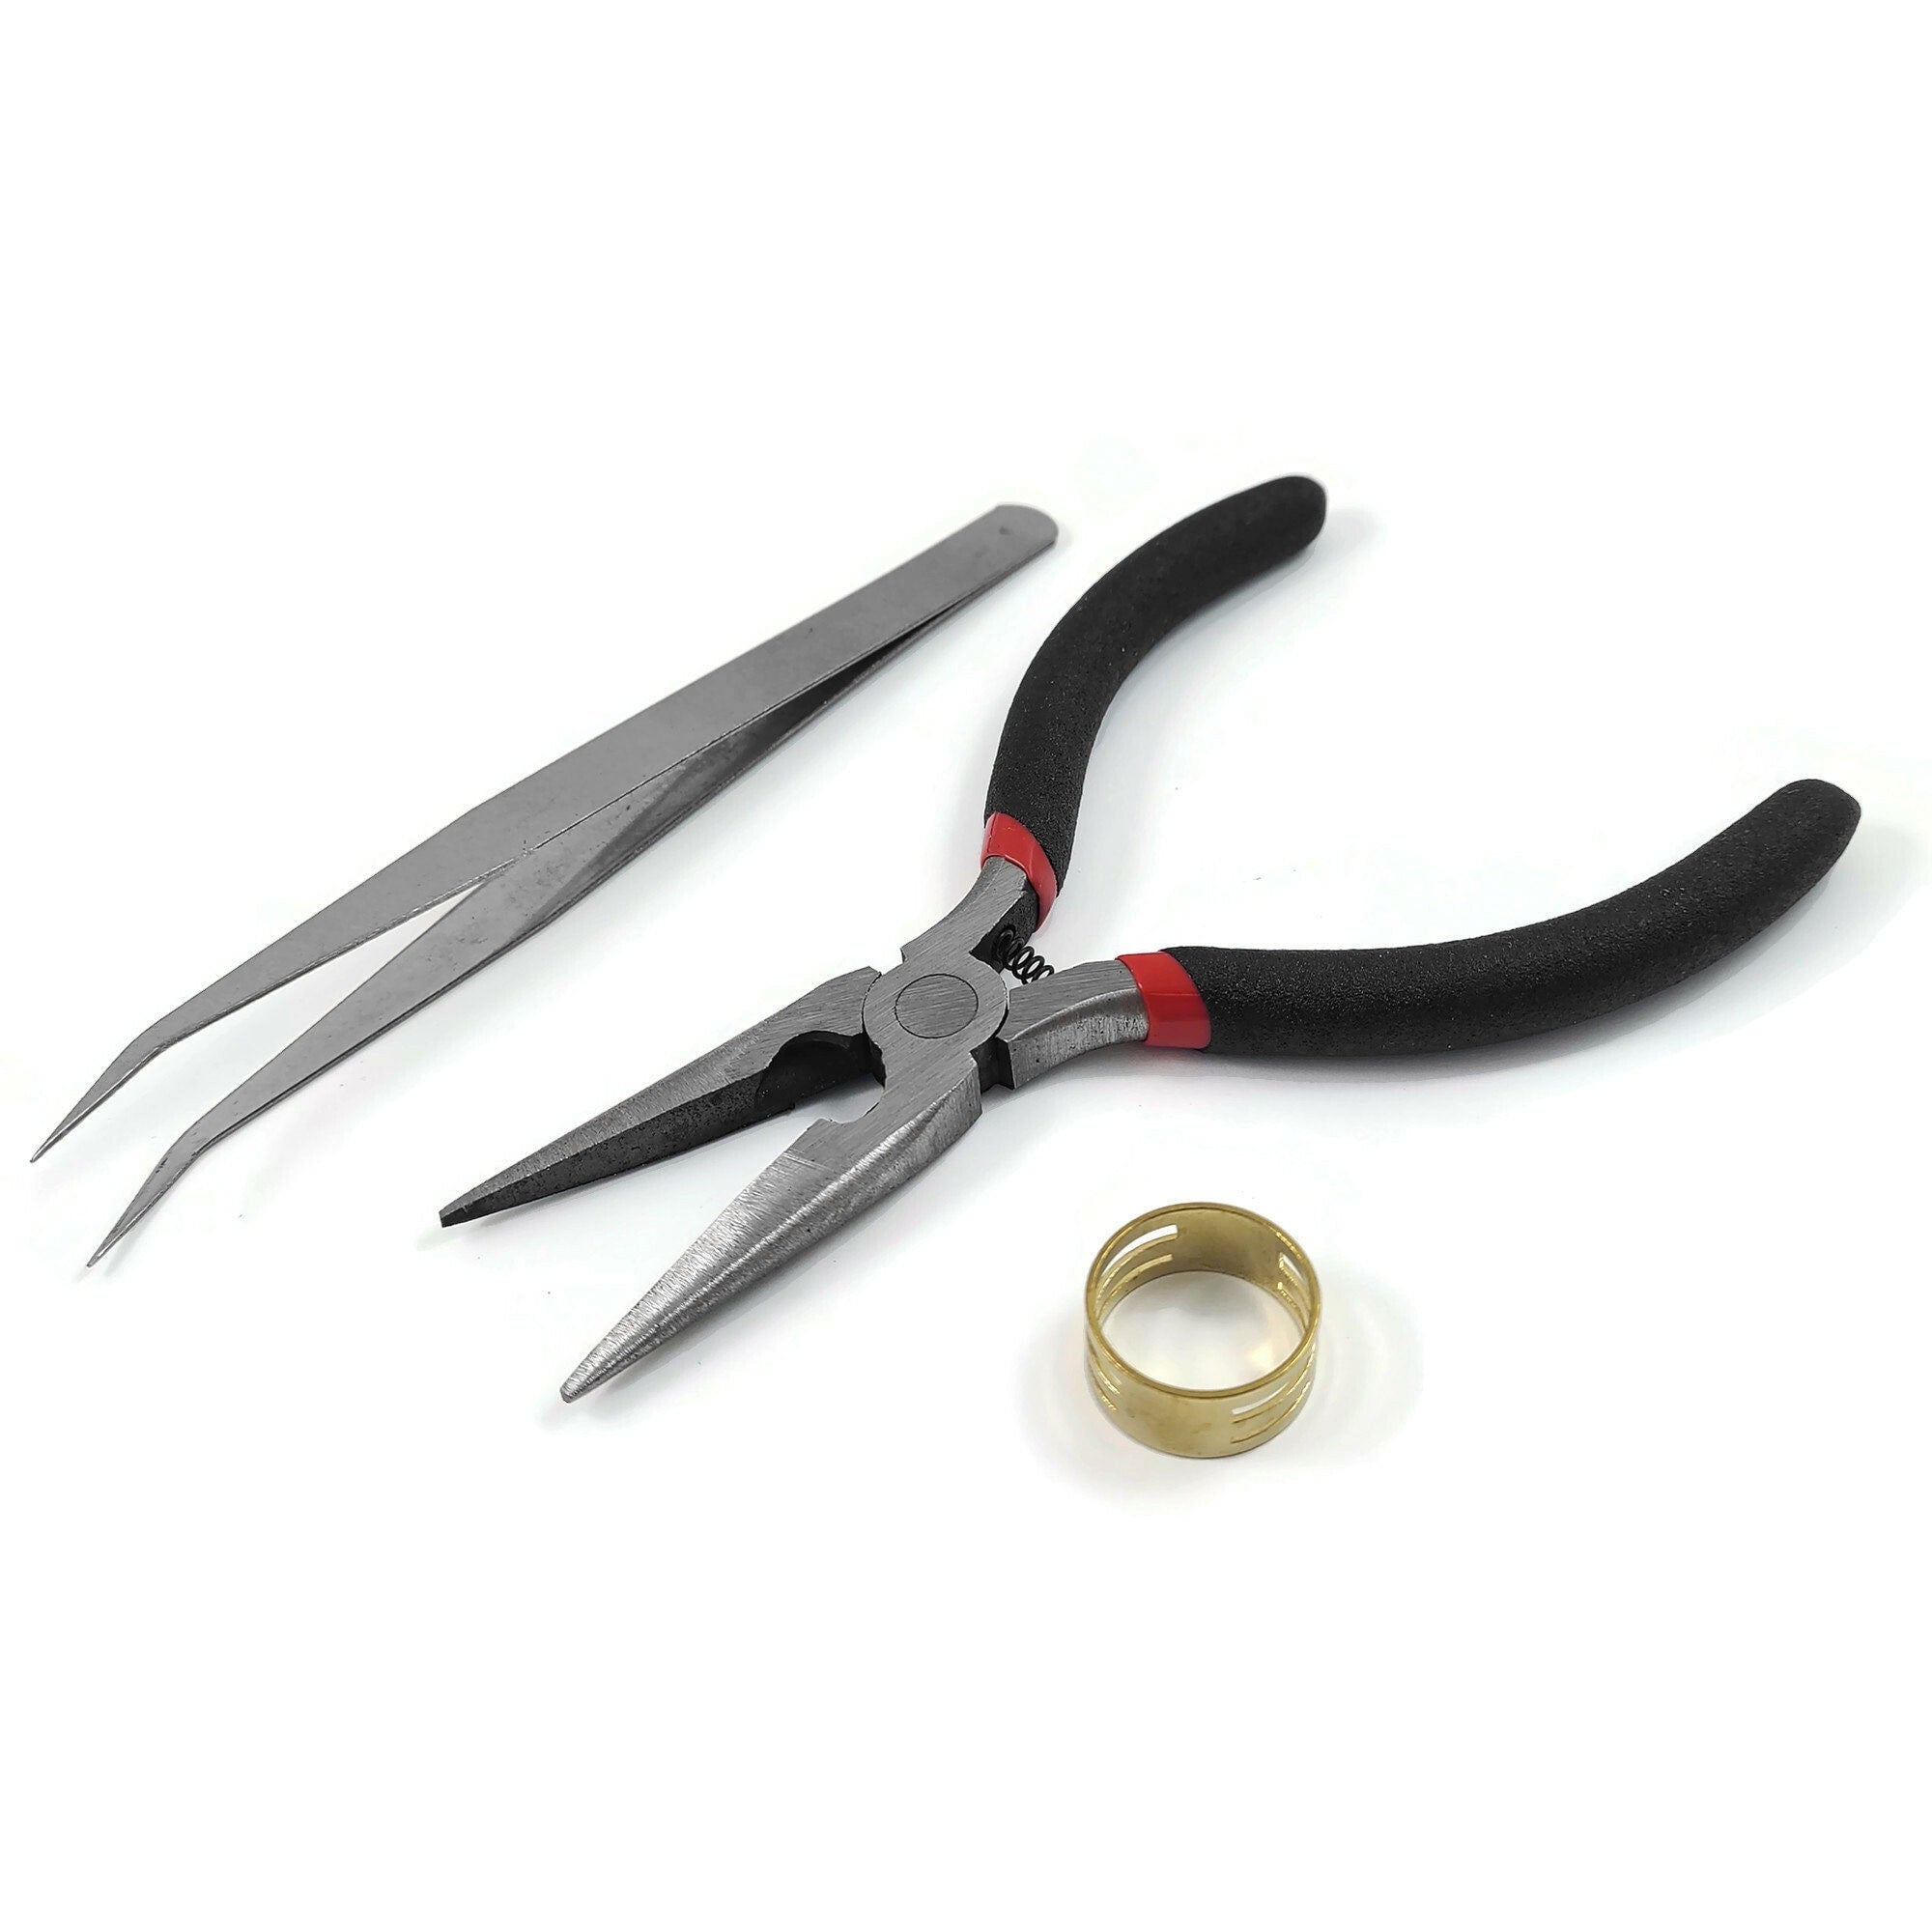 Jewelry making kit for beginners - Pliers, tweezers, and jump ring opener closer tool